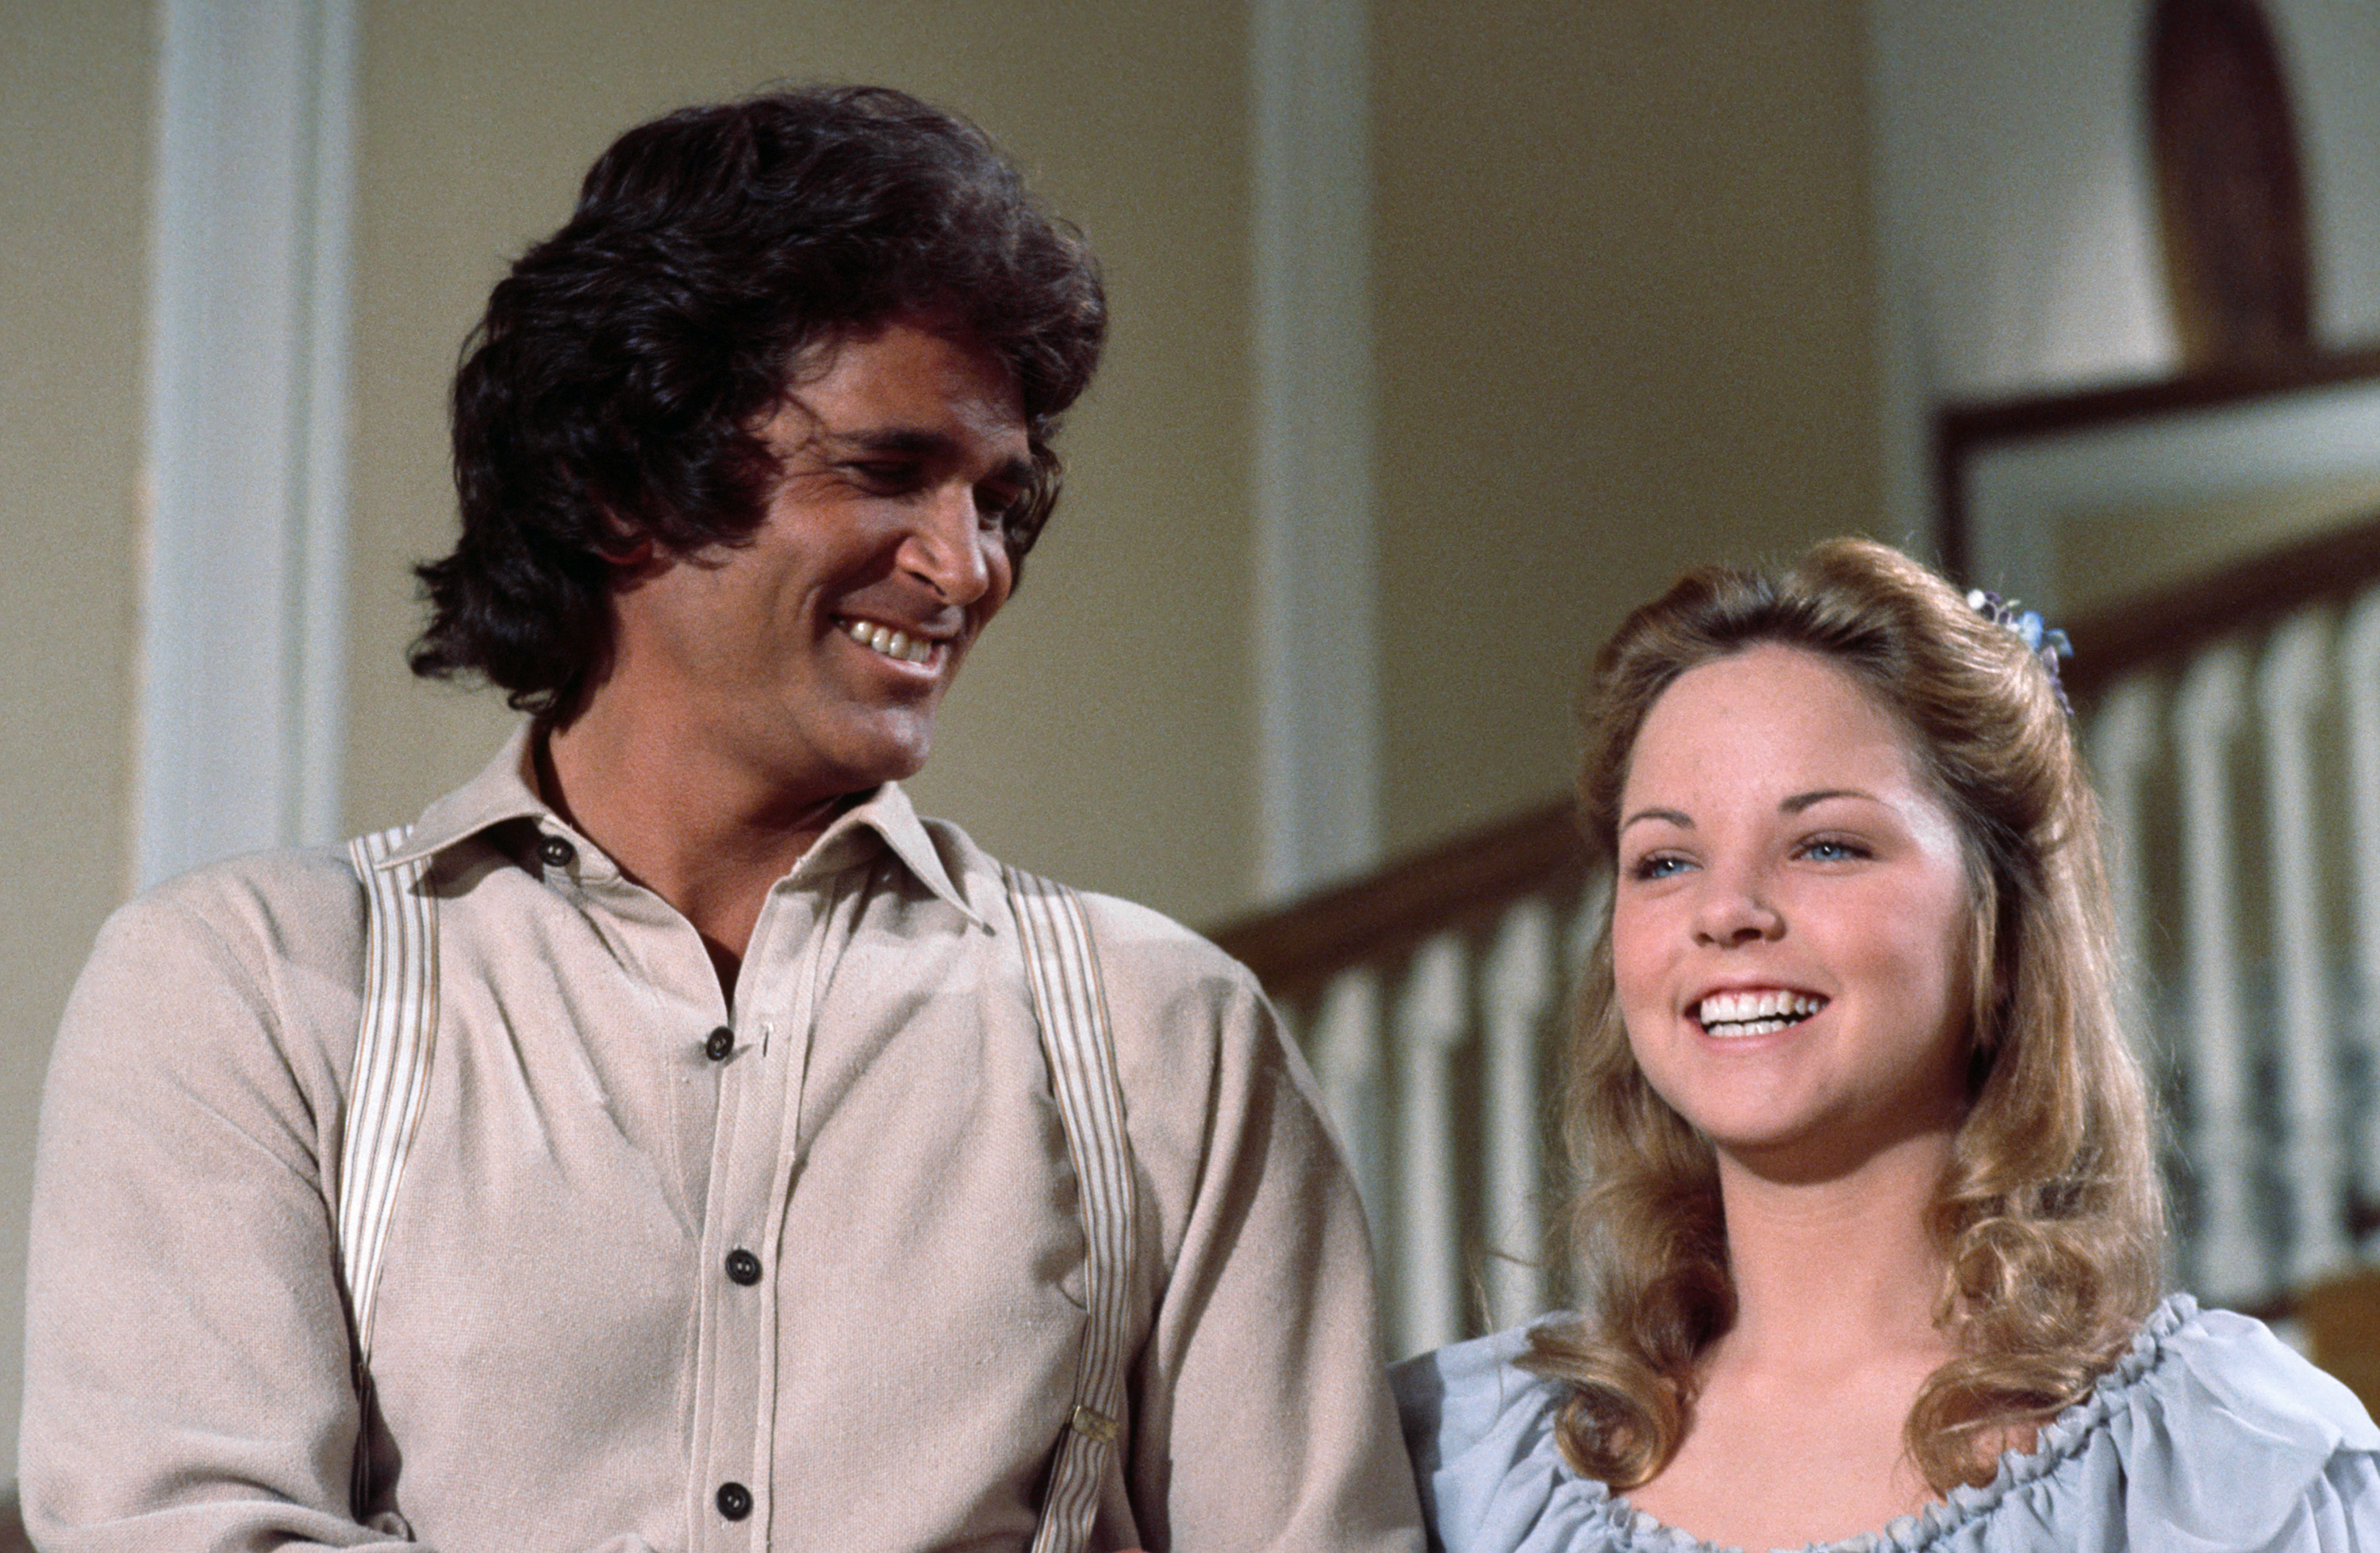 Why ‘Little House on the Prairie’ Alum Melissa Sue Anderson Turned Down a Major Film Role That Went to Brooke Shields